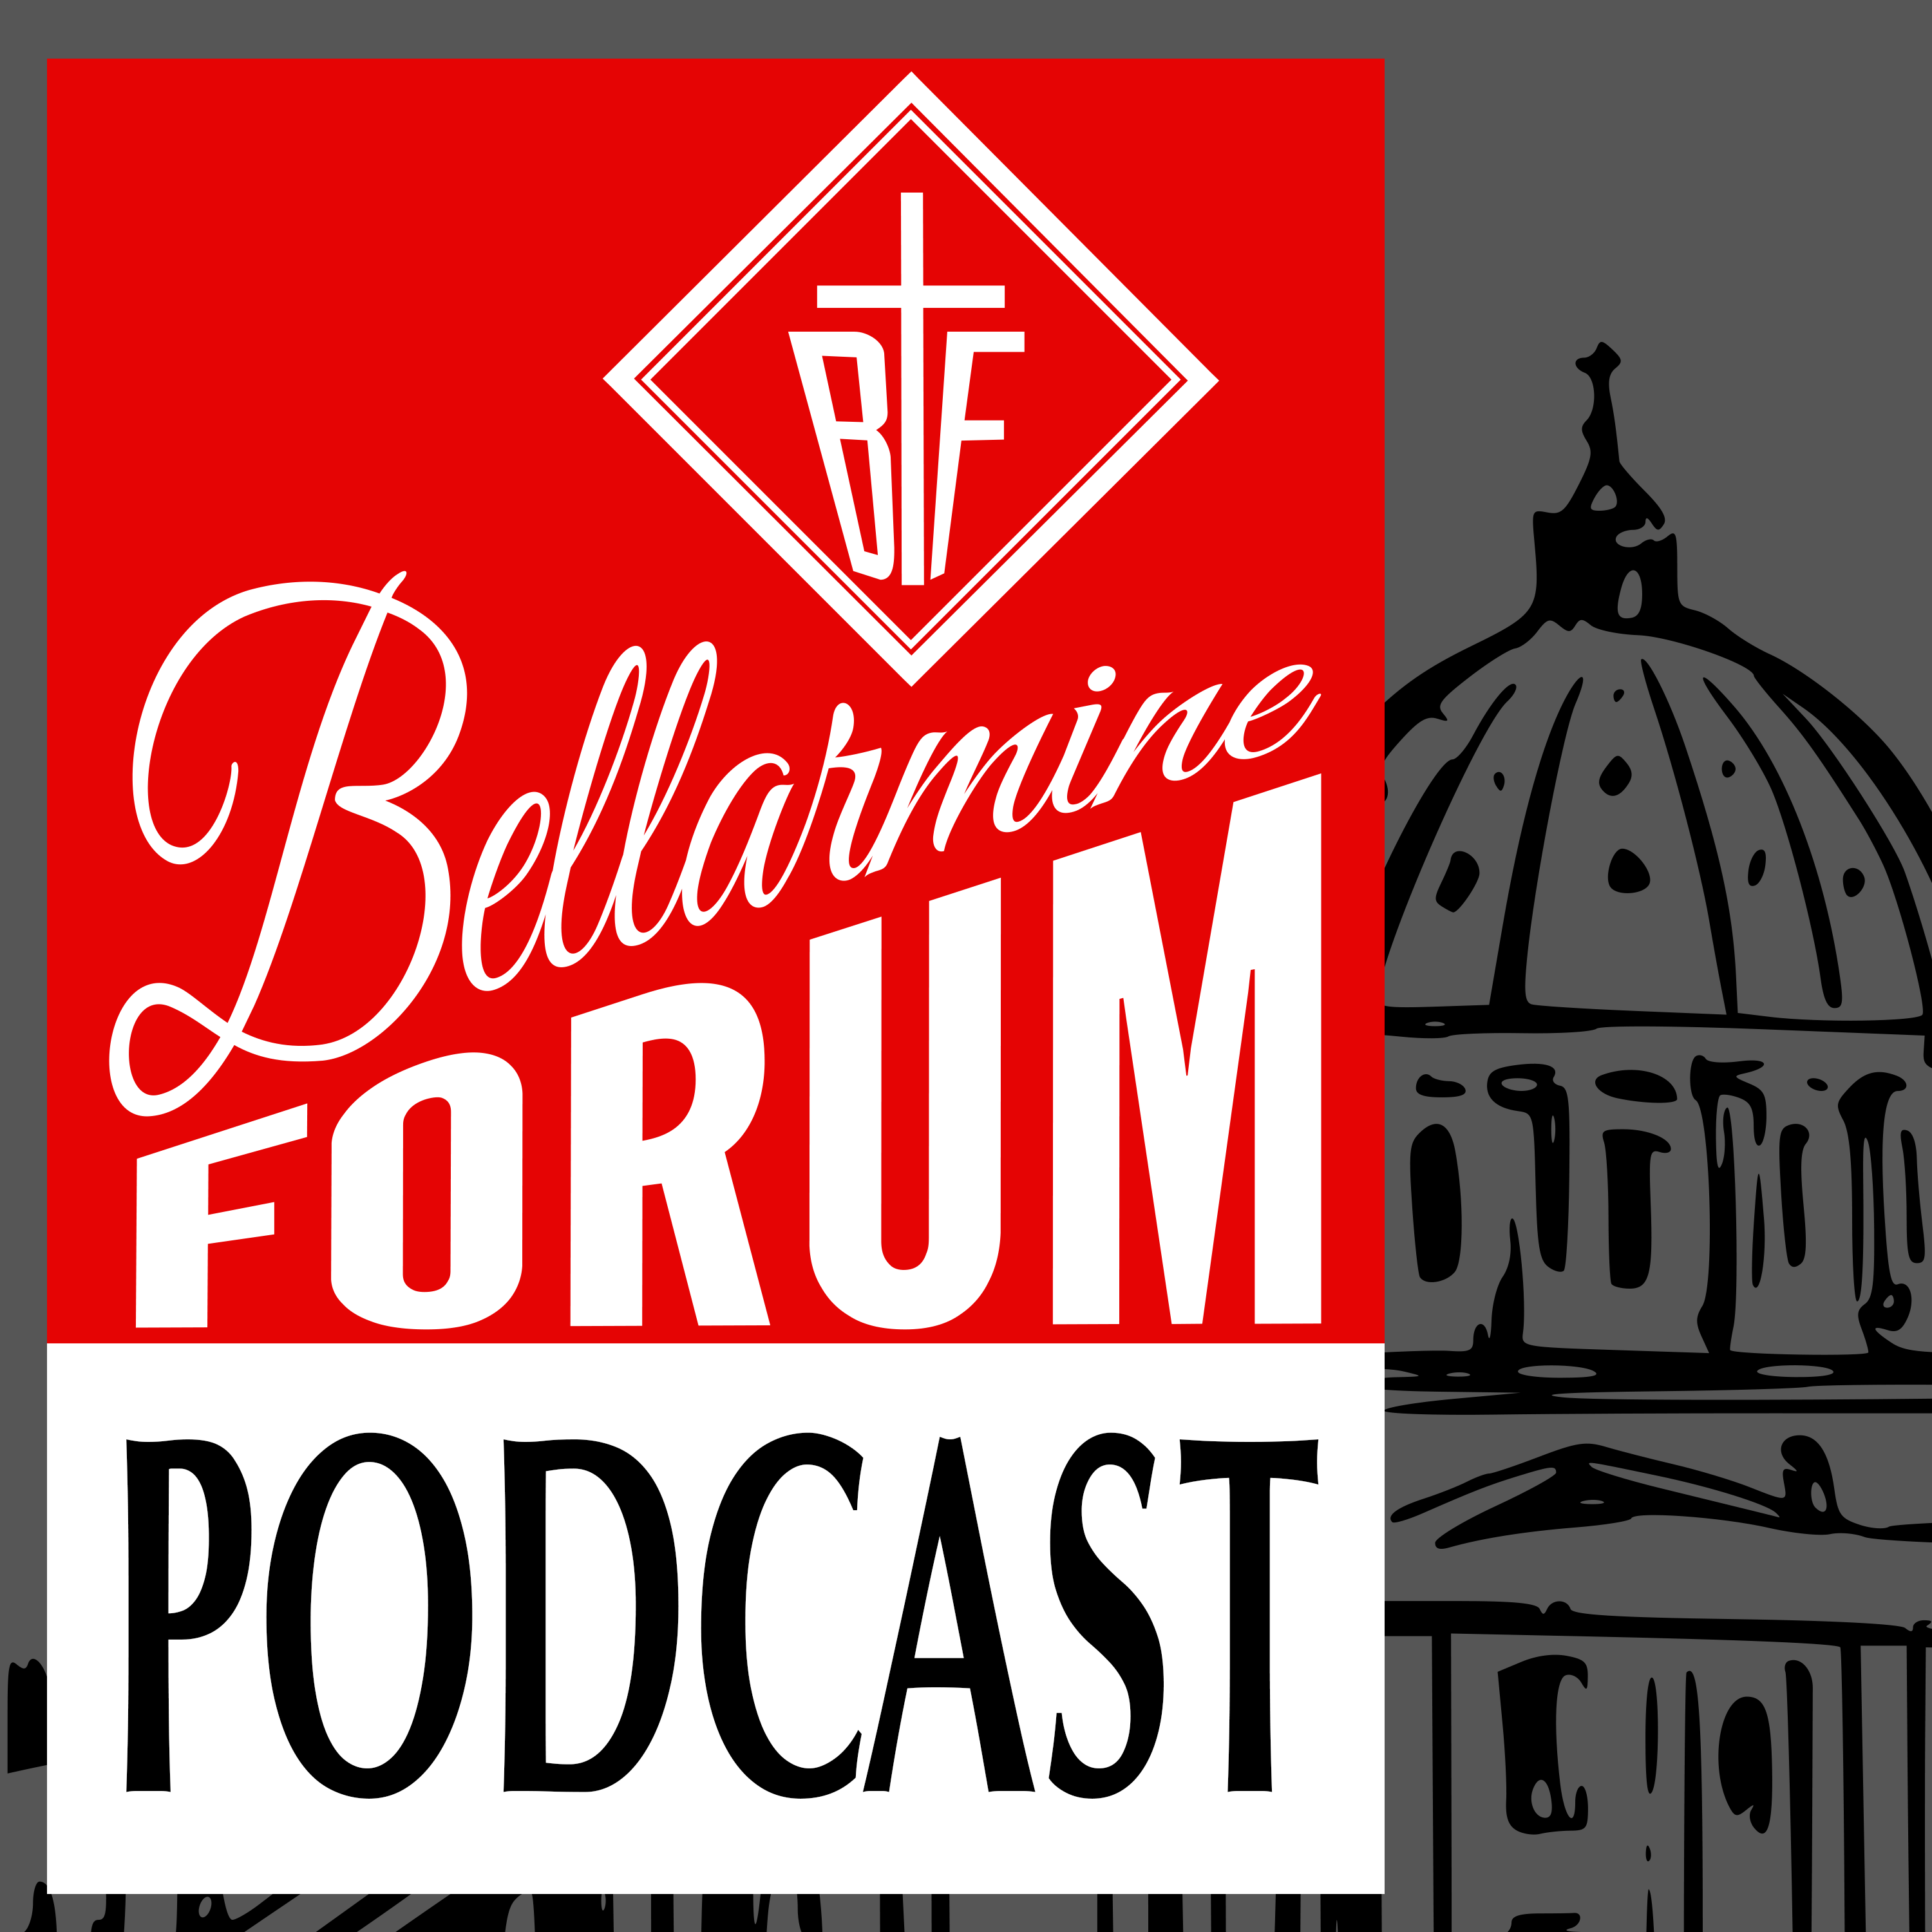 kick in the pants on the four last things bfp nov17 the bellarmine forum the bellarmine forum